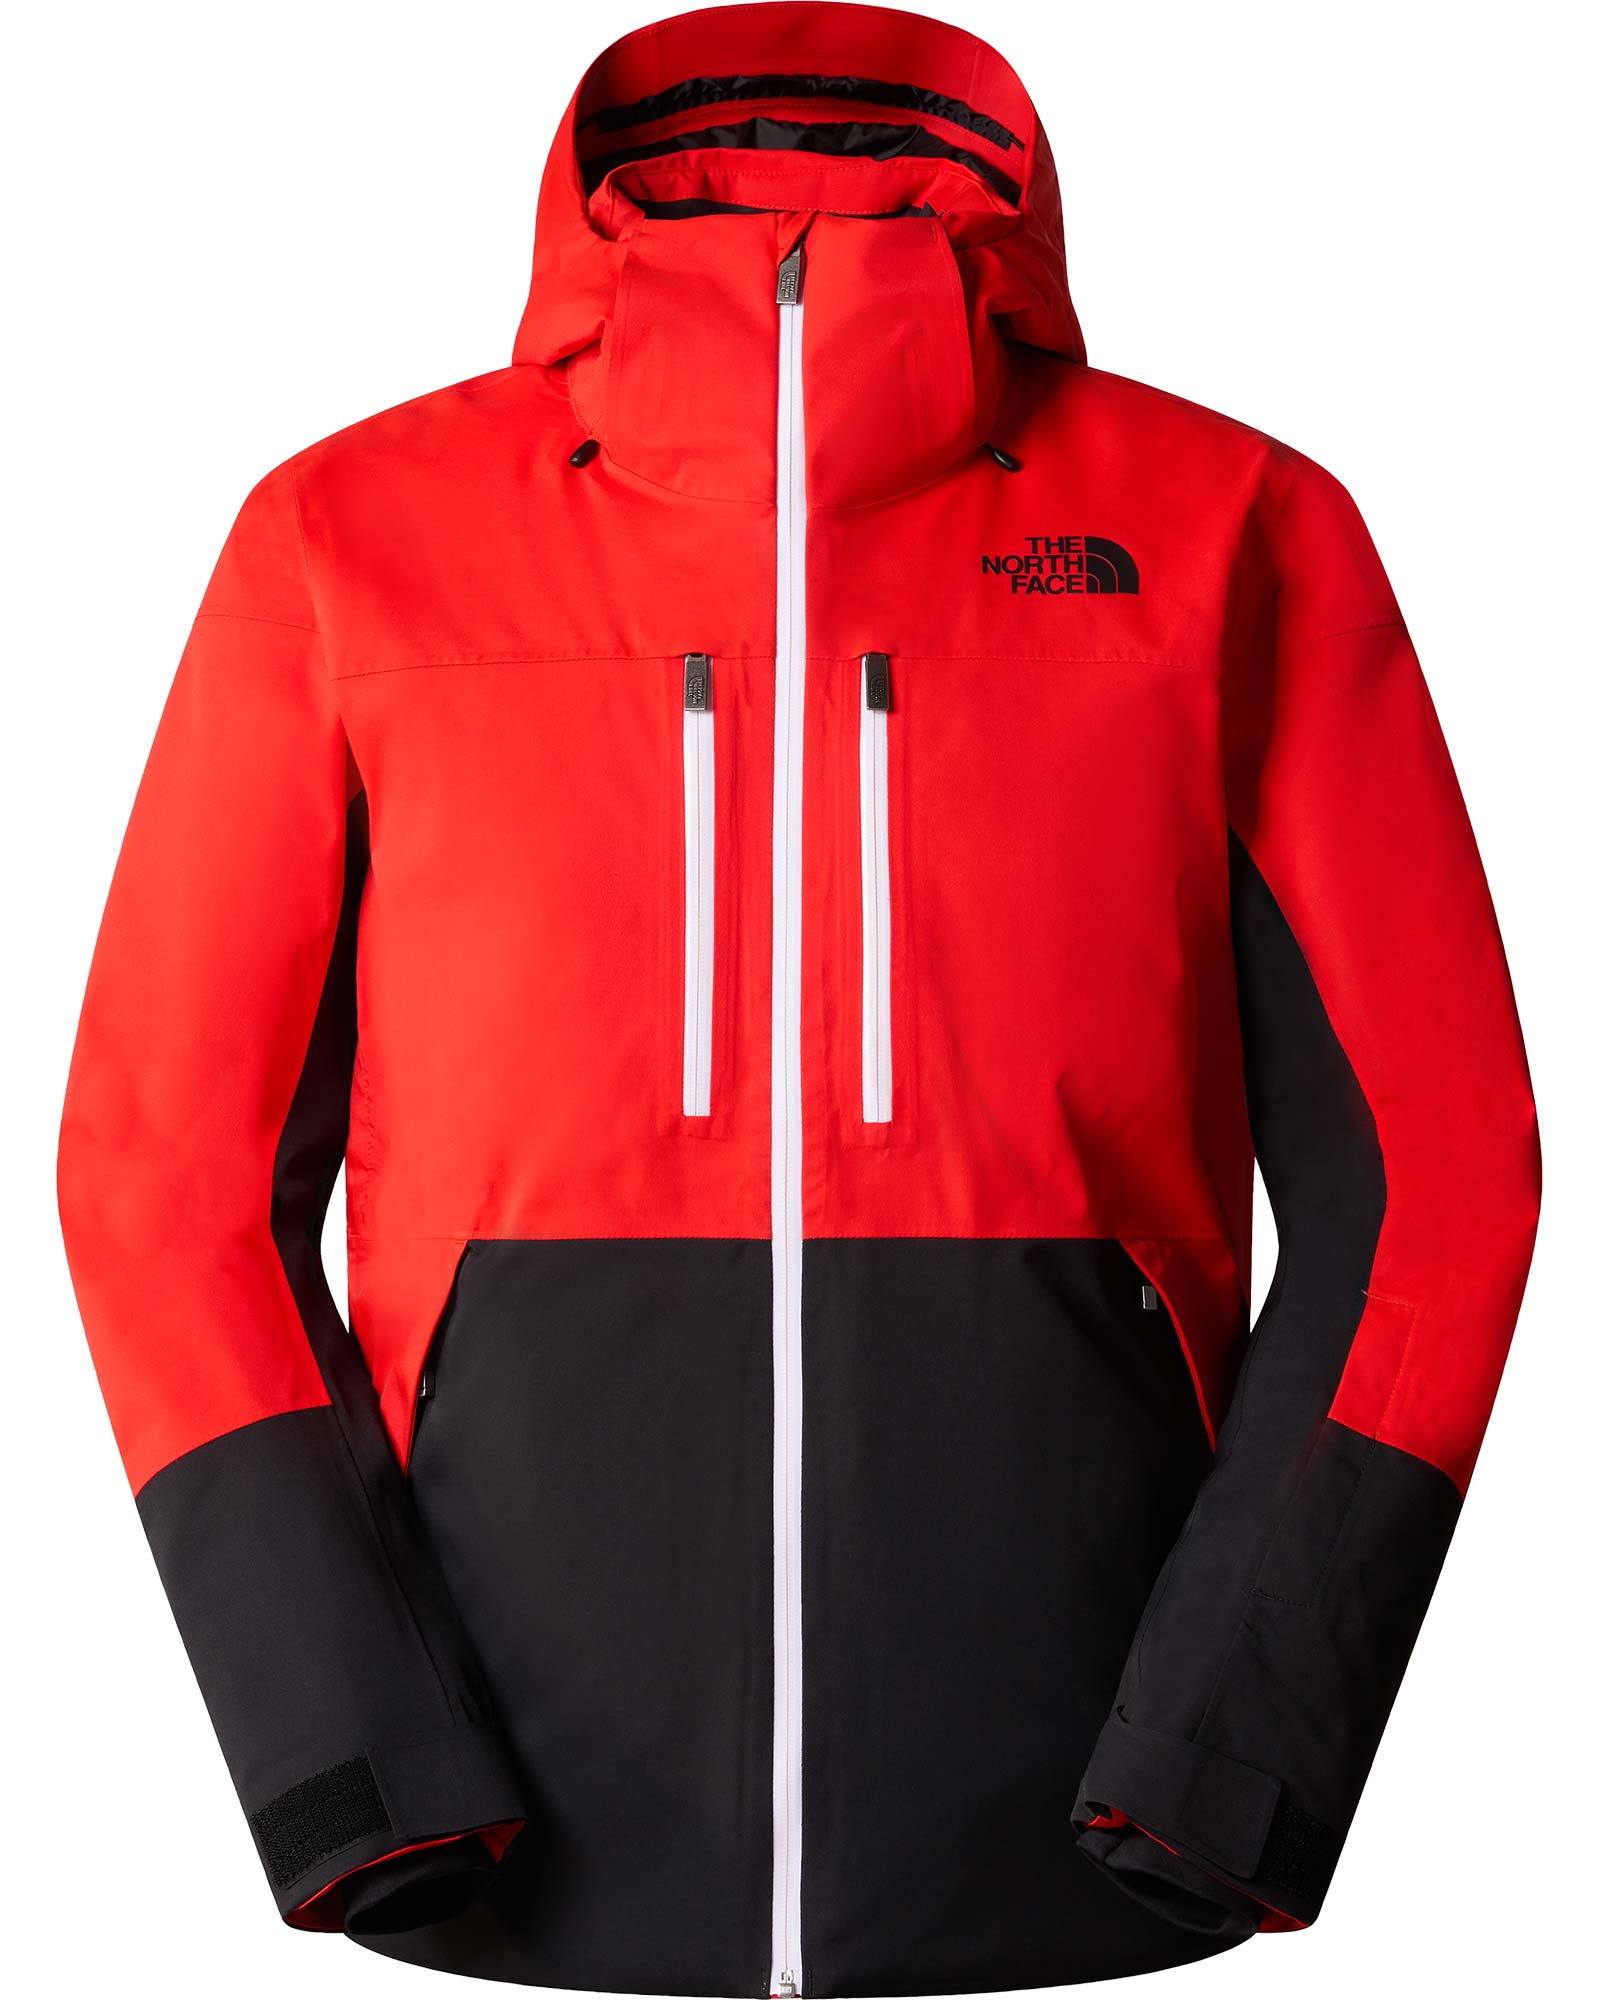 The North Face Chakal Men’s Jacket - Fiery Red/TNF Black L